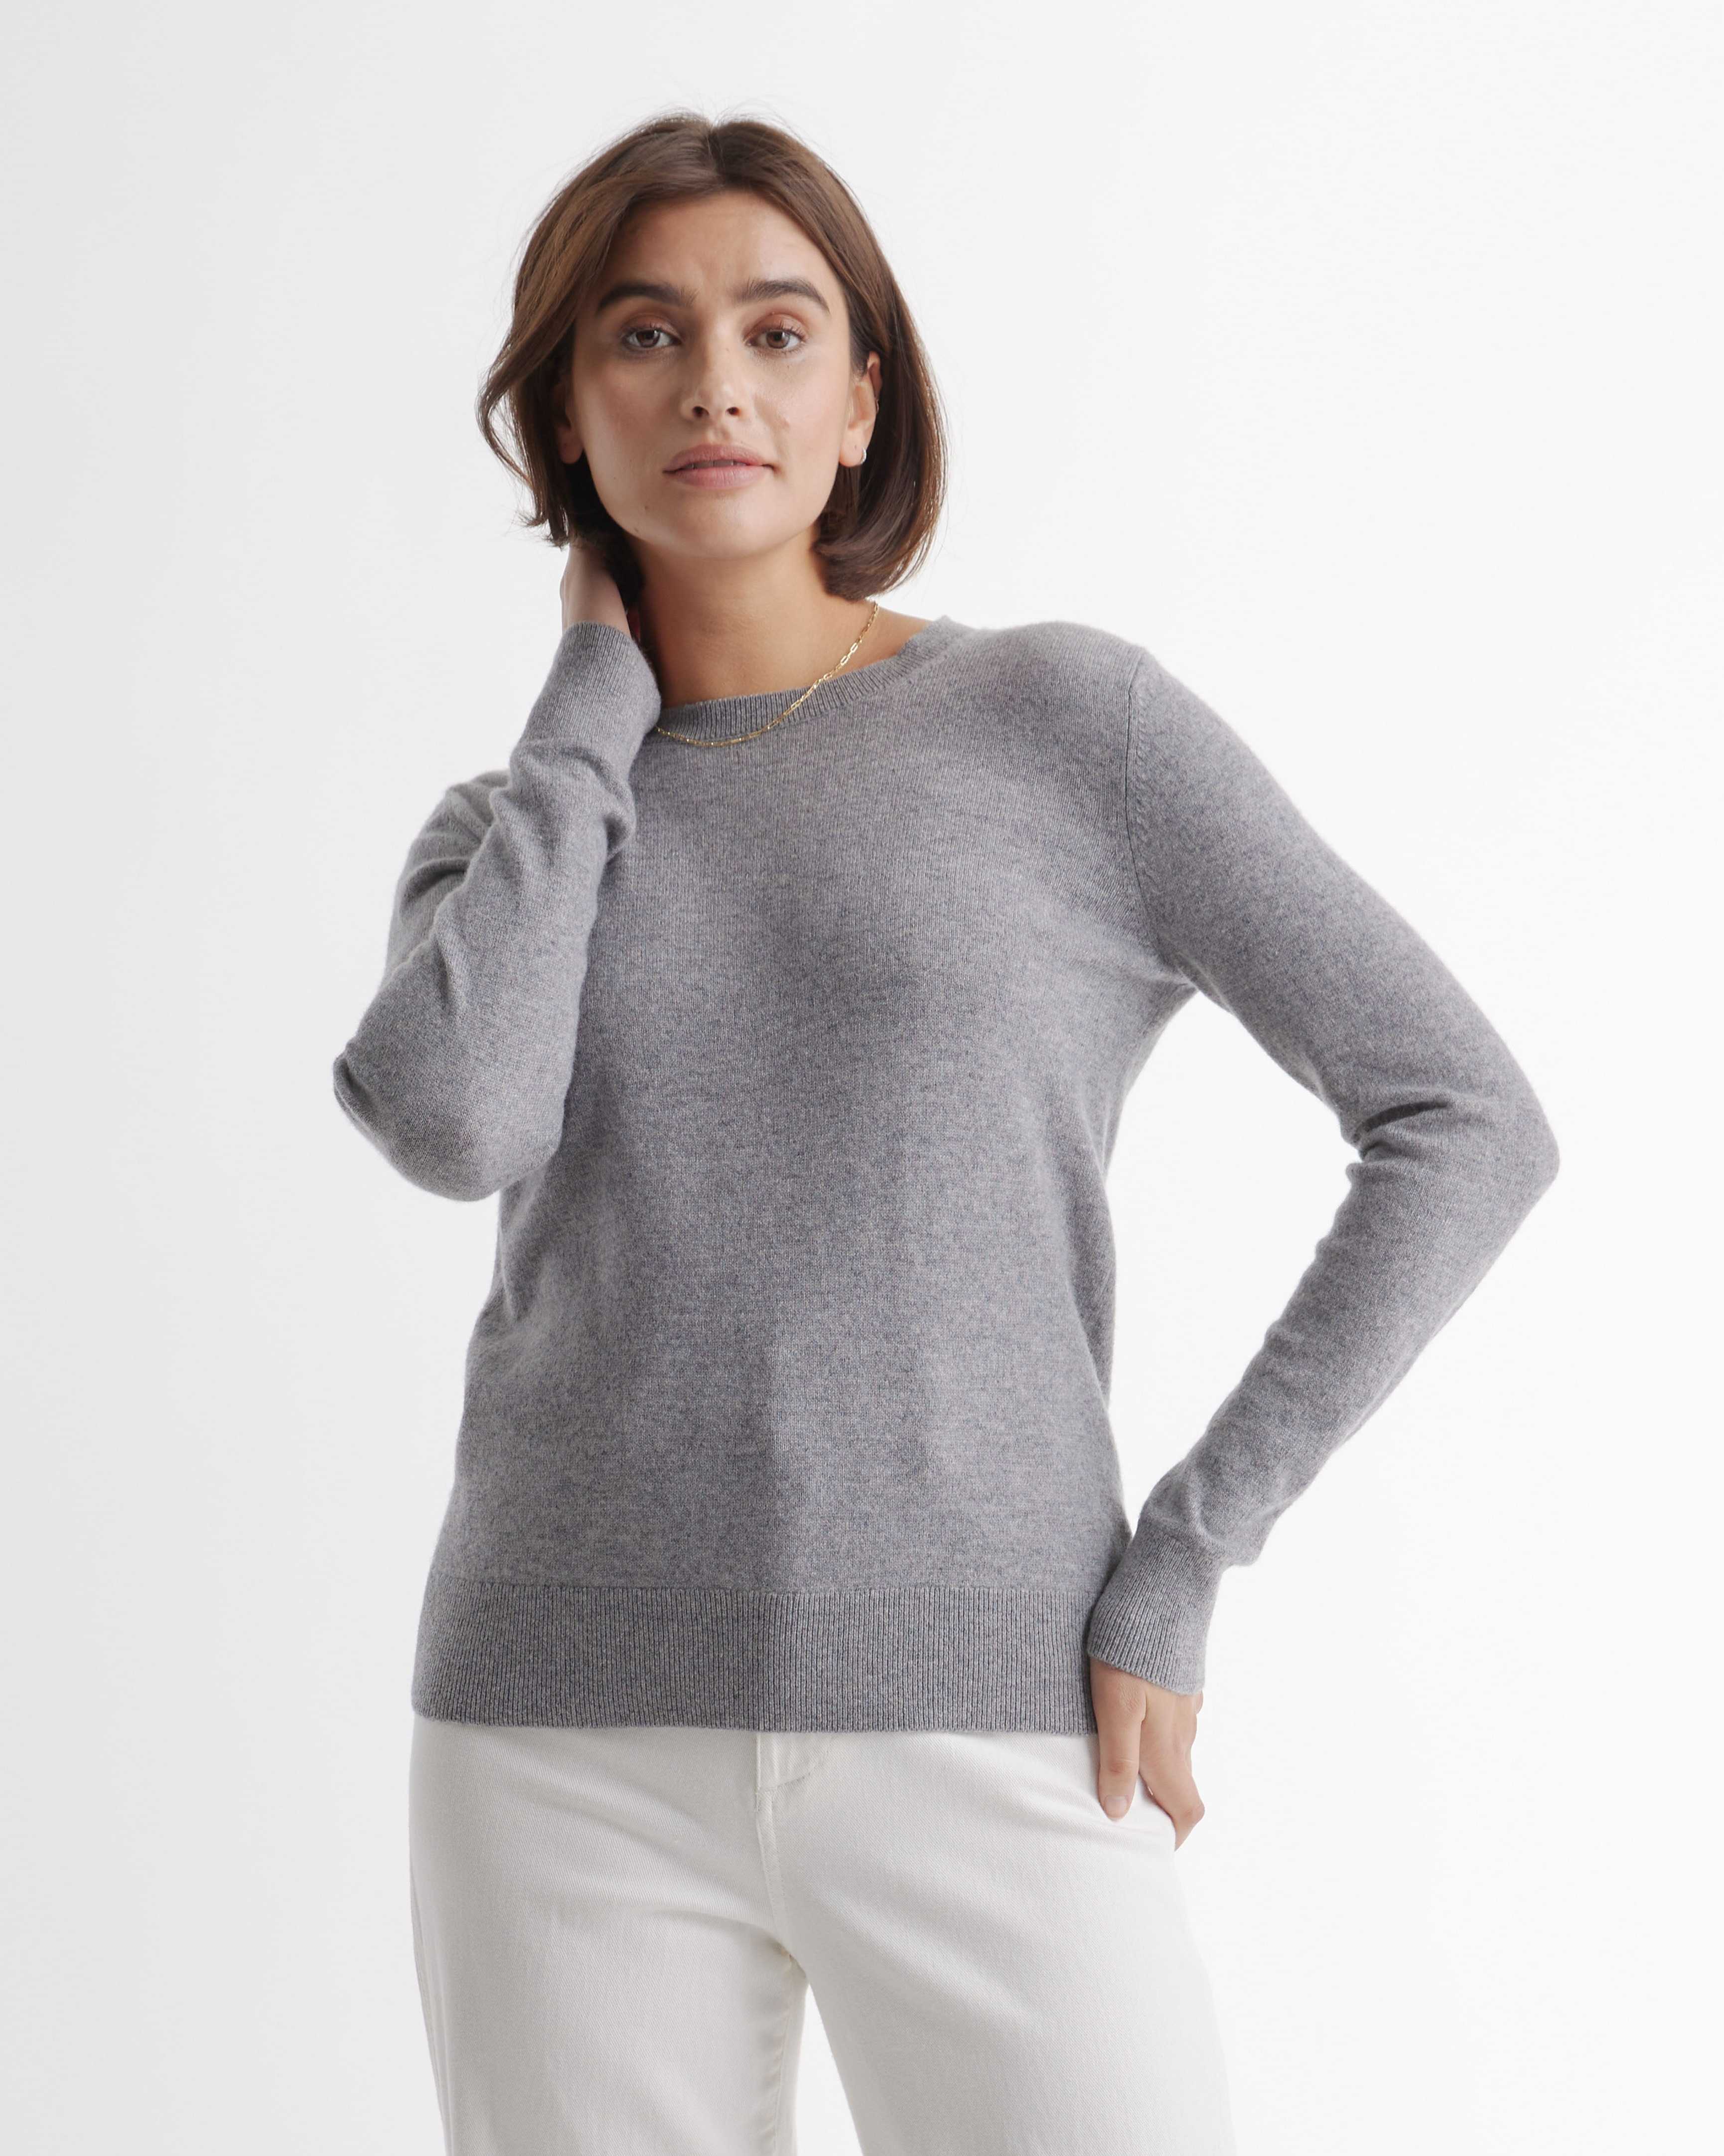 Best Cashmere Sweaters for Women: 8 Quality Options for Any Budget